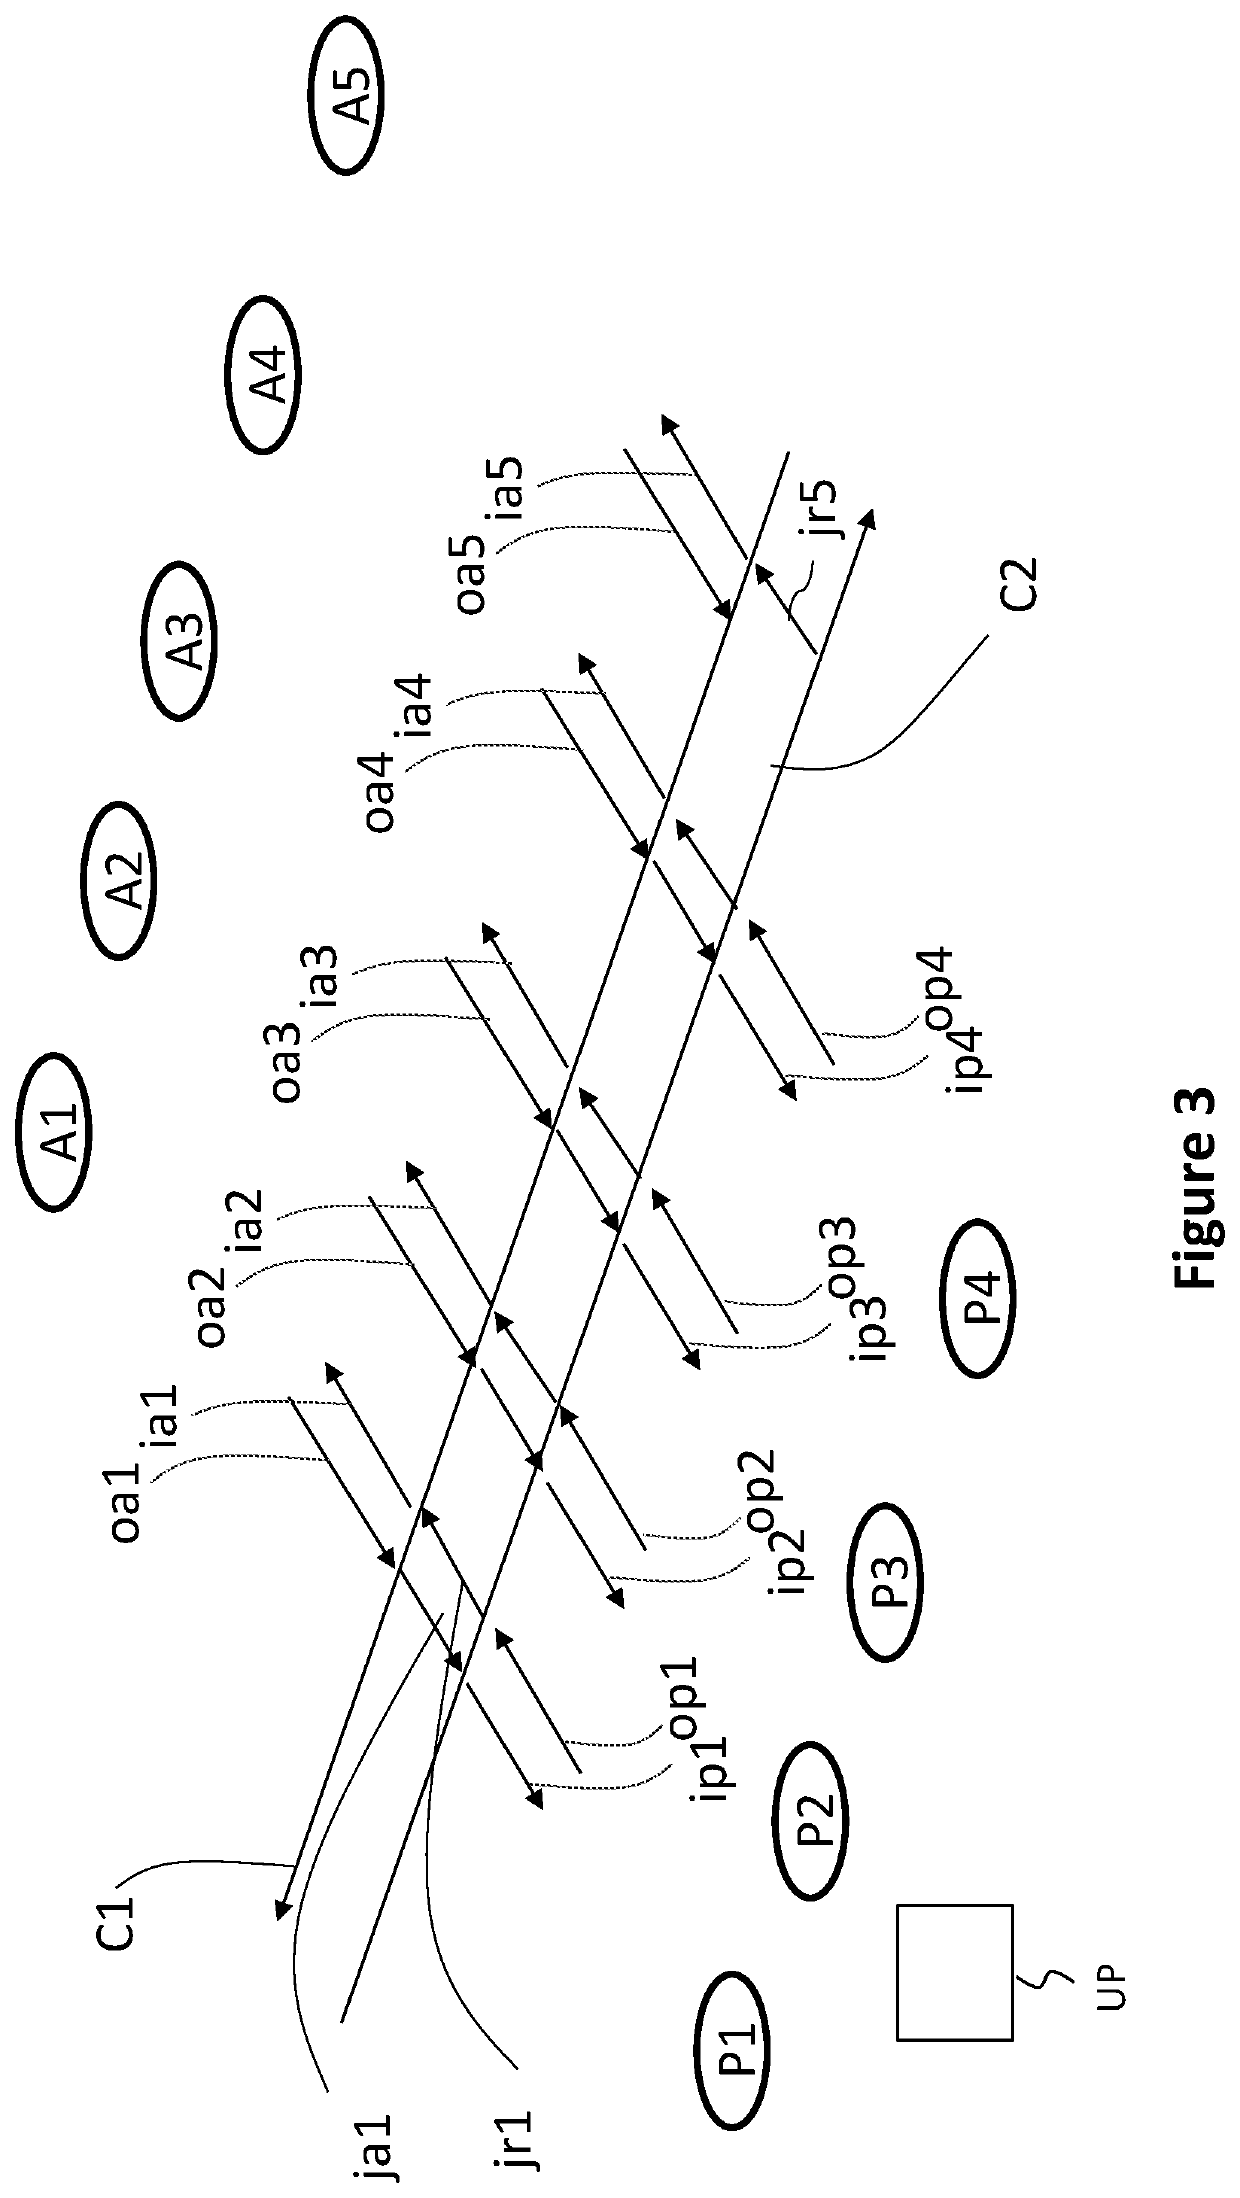 System for conveying loads between a plurality of storage units and a plurality of preparation stations, through a horizontal load-routing network